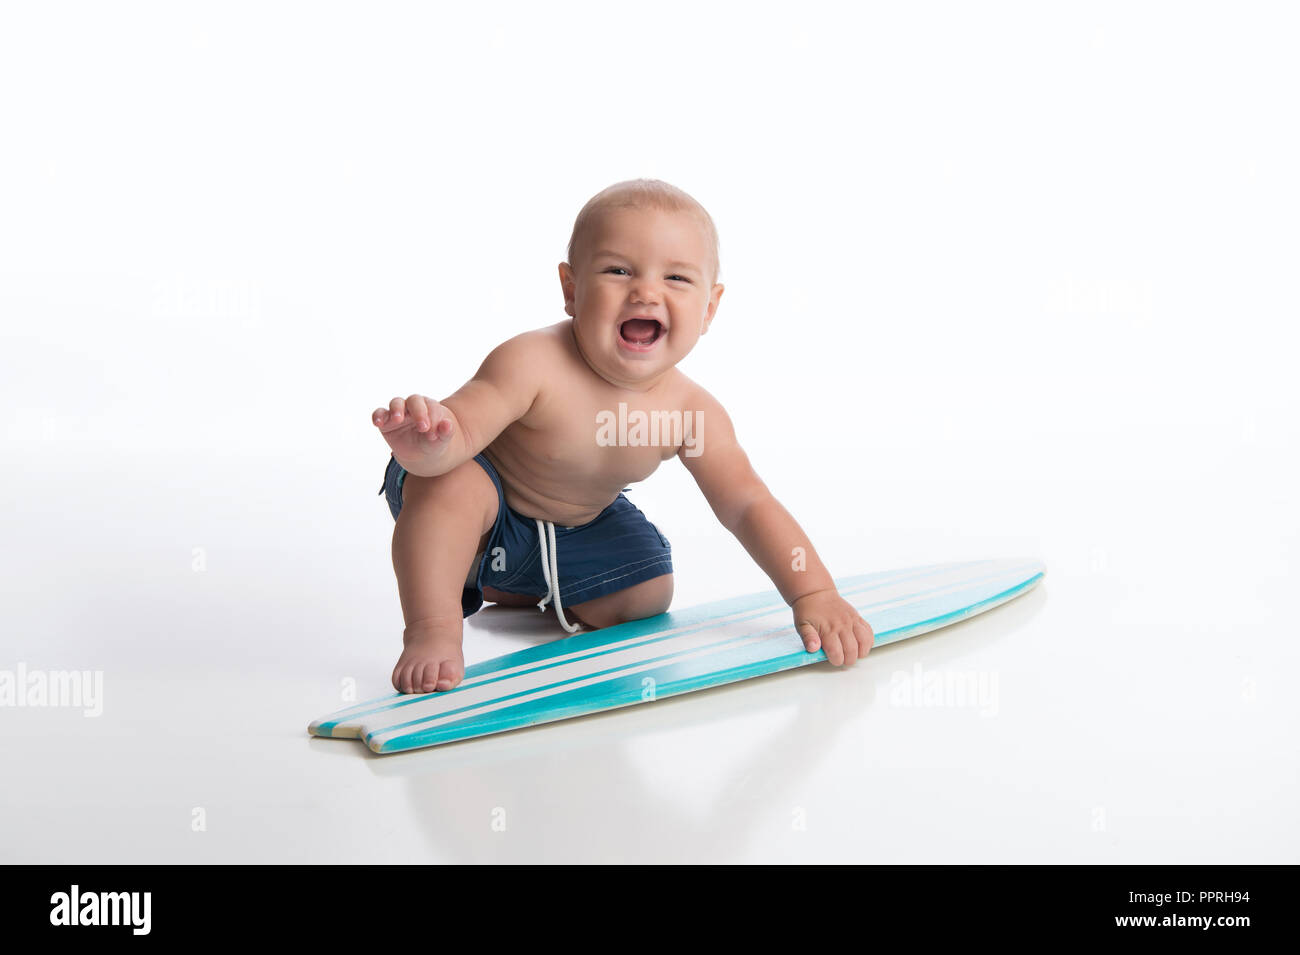 A laughing seven month old baby boy playing with a tiny surfboard. Shot in the studio on a white, seamless backdrop. Stock Photo